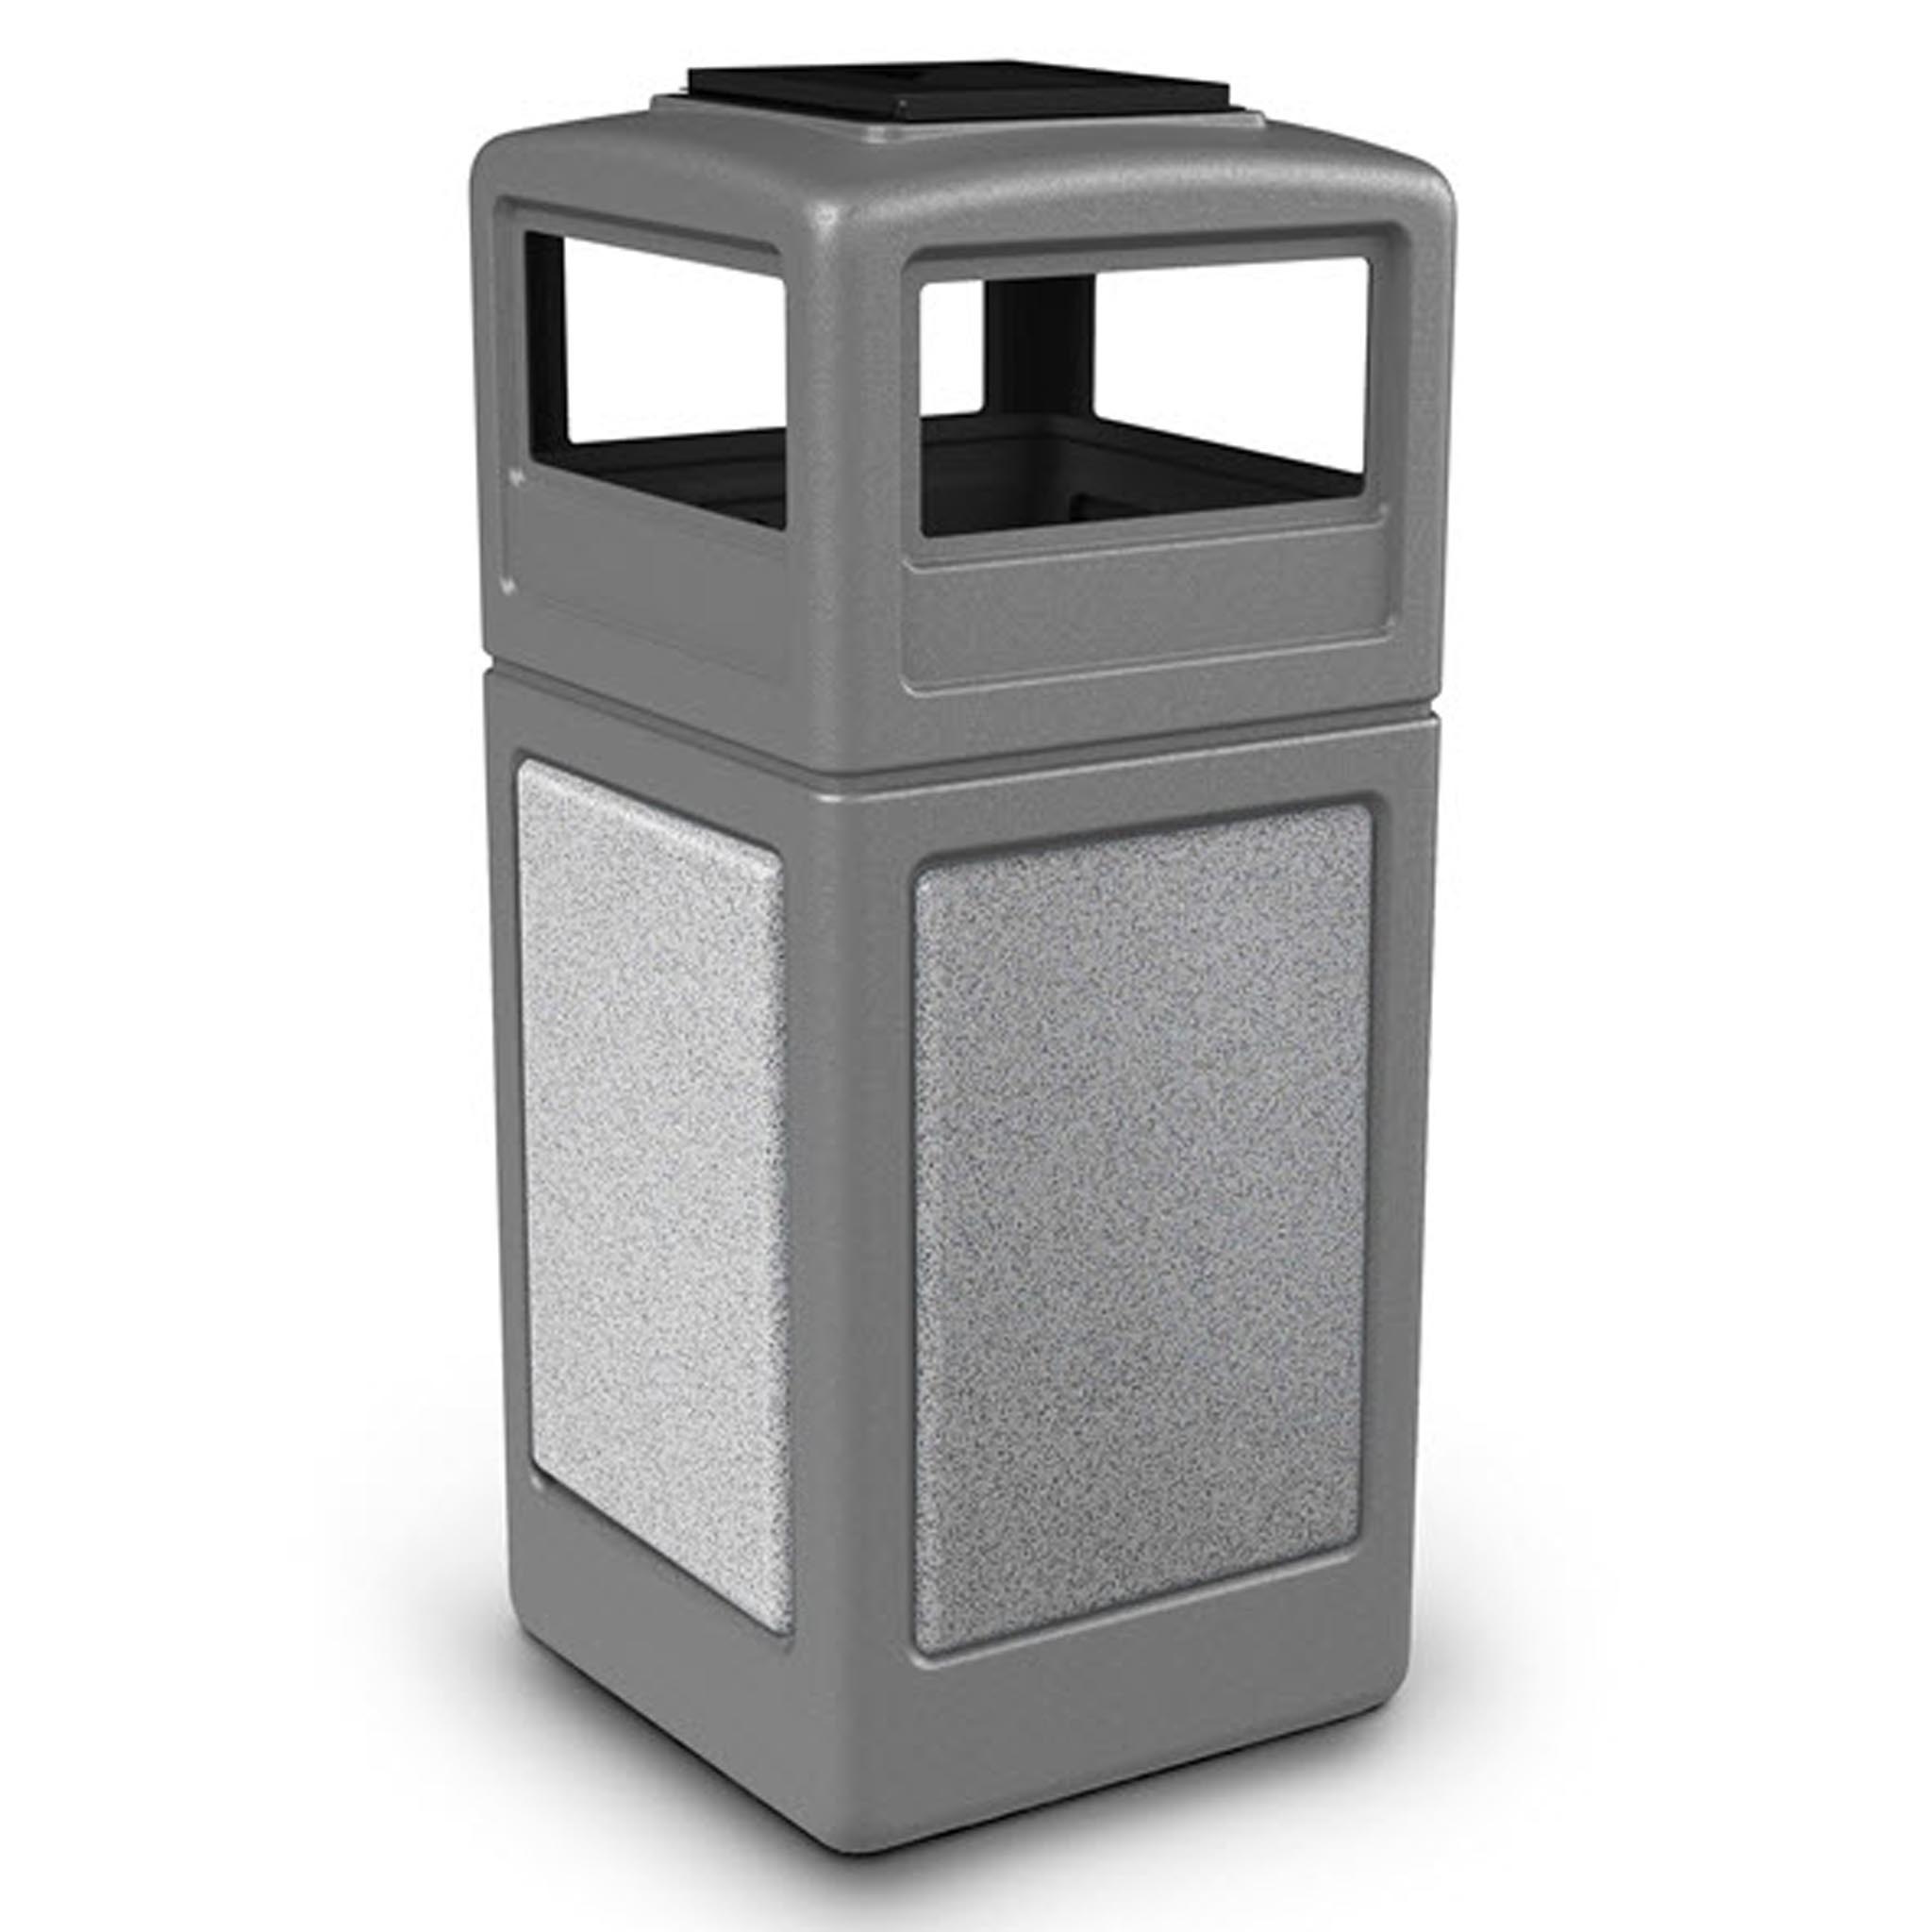 http://www.commercialzone.com/wp-content/uploads/2019/03/72051199-StoneTec-Series-42-Gallon-Square-Waste-Receptacle-with-Ashtray-Dome-Lid-Gray-with-Ashtone-Panels-Studio-Image-1.jpg